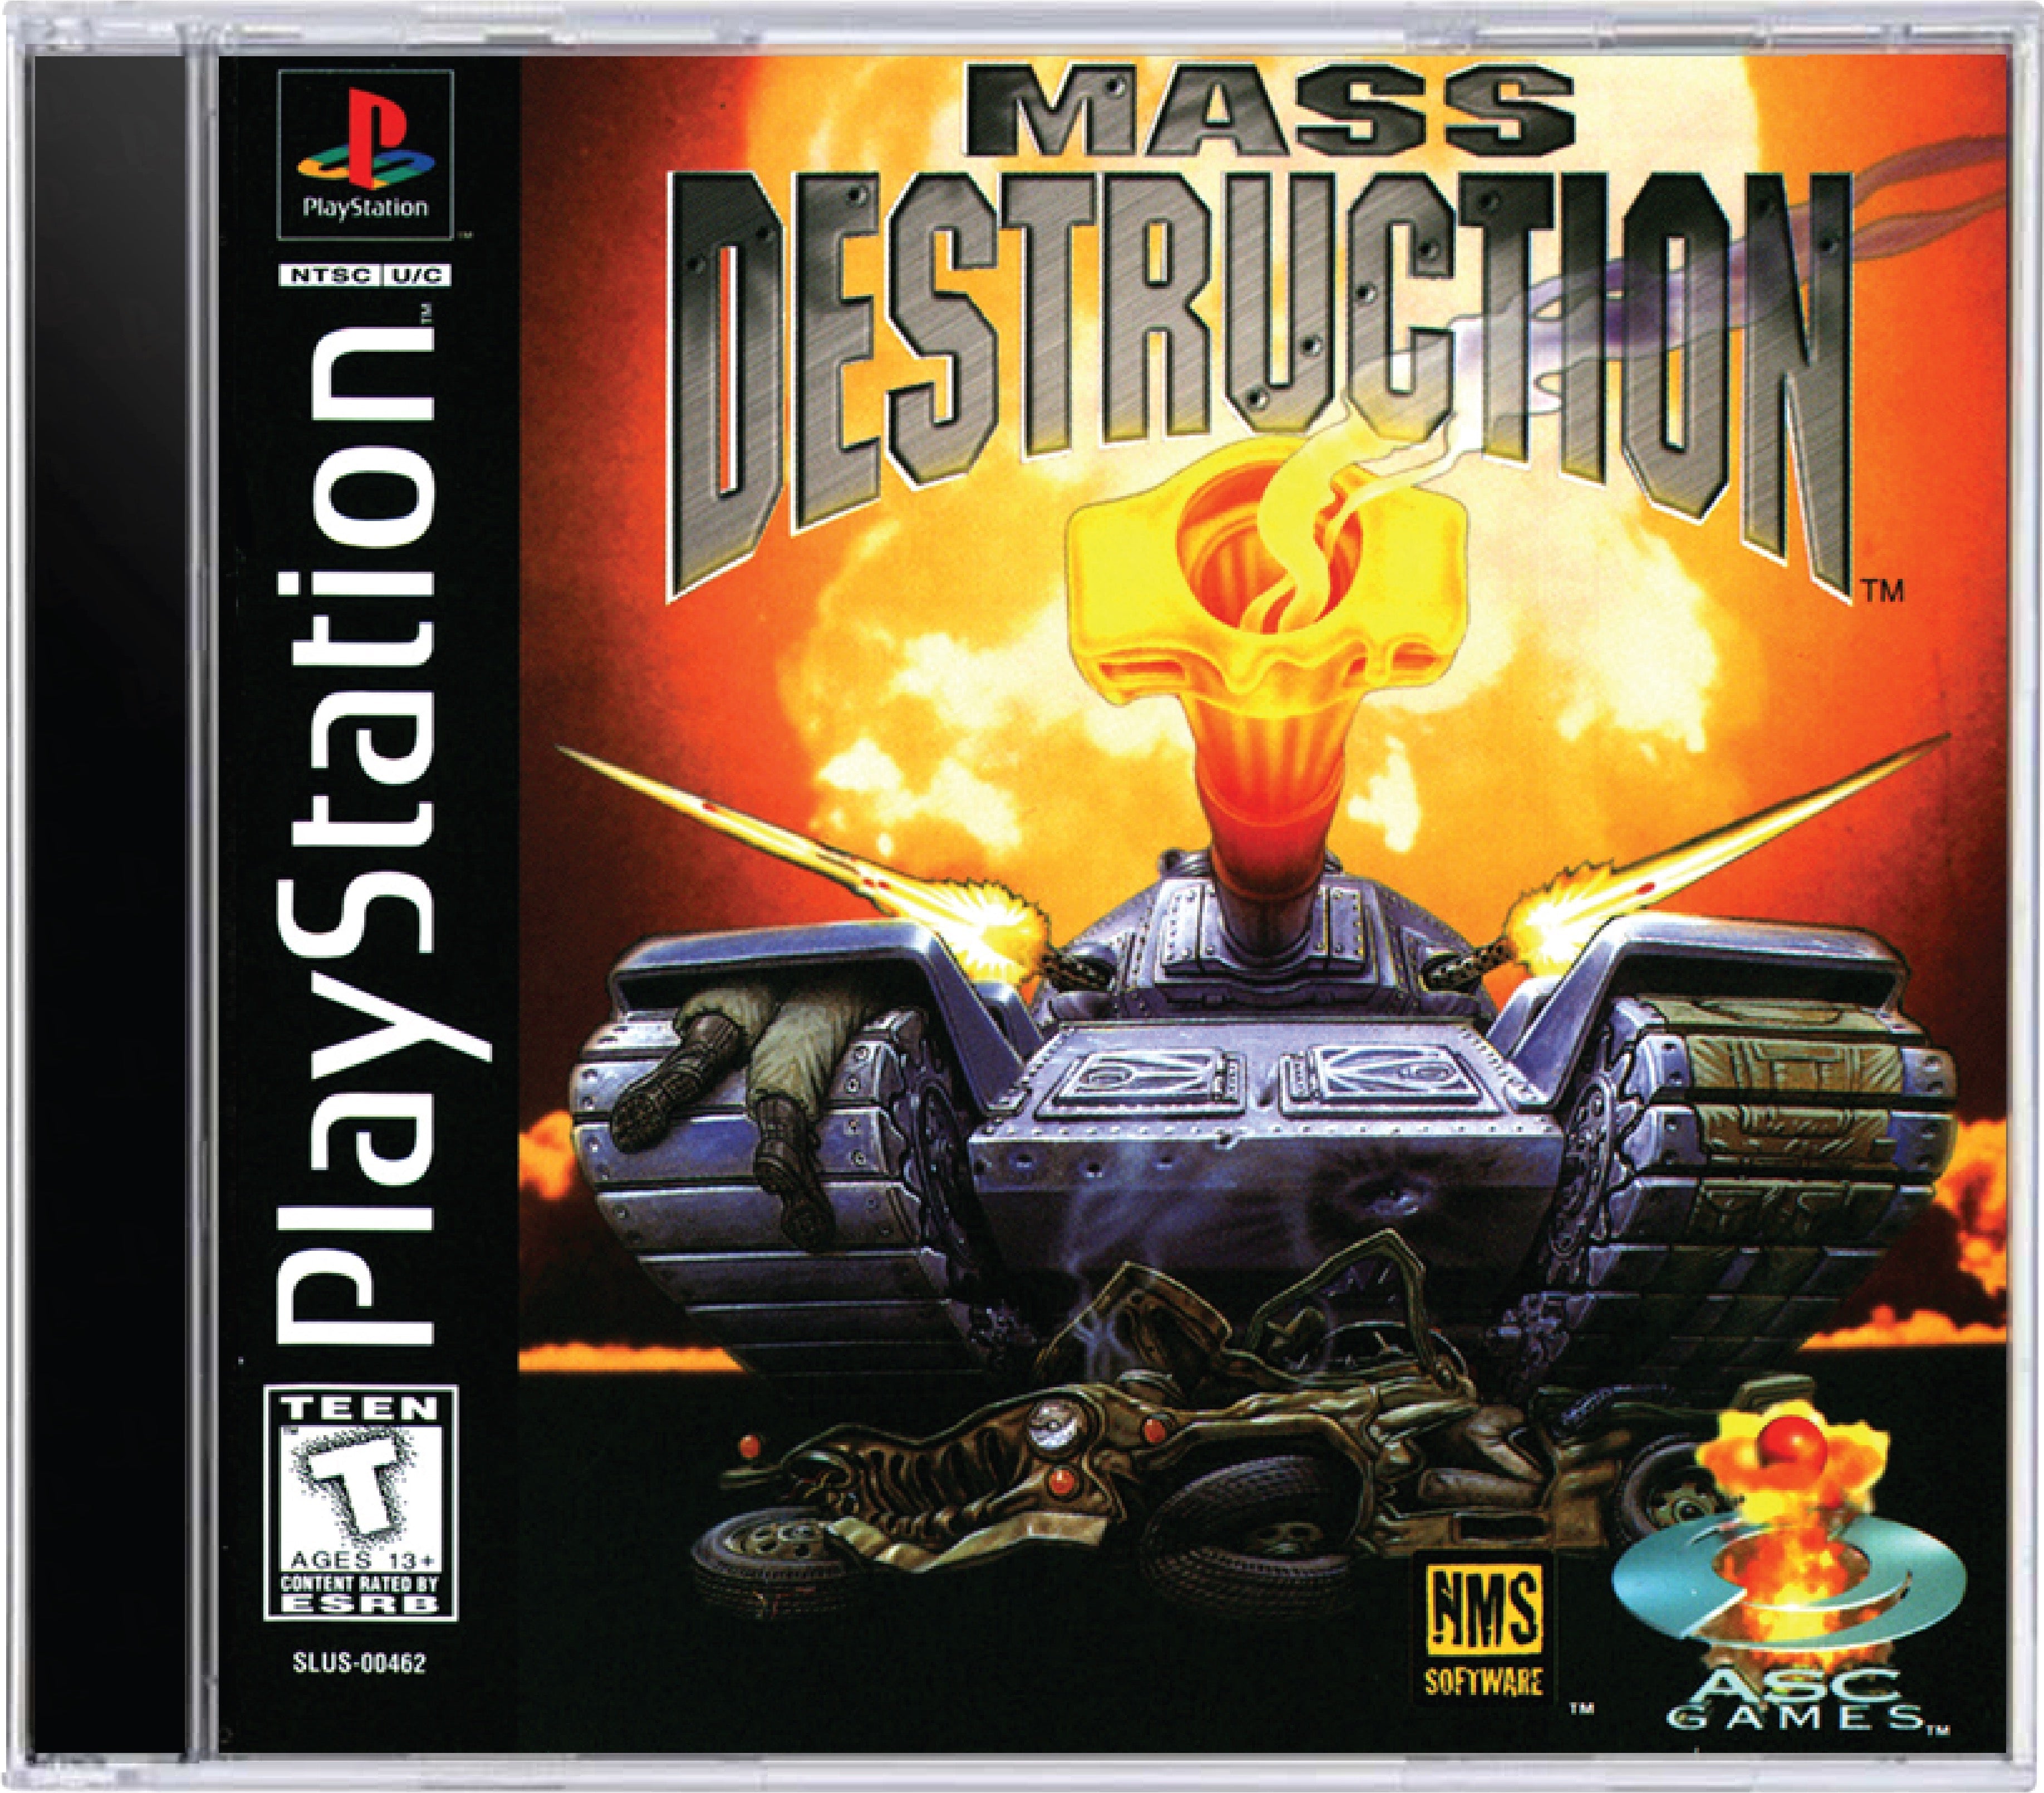 Mass Destruction Cover Art and Product Photo